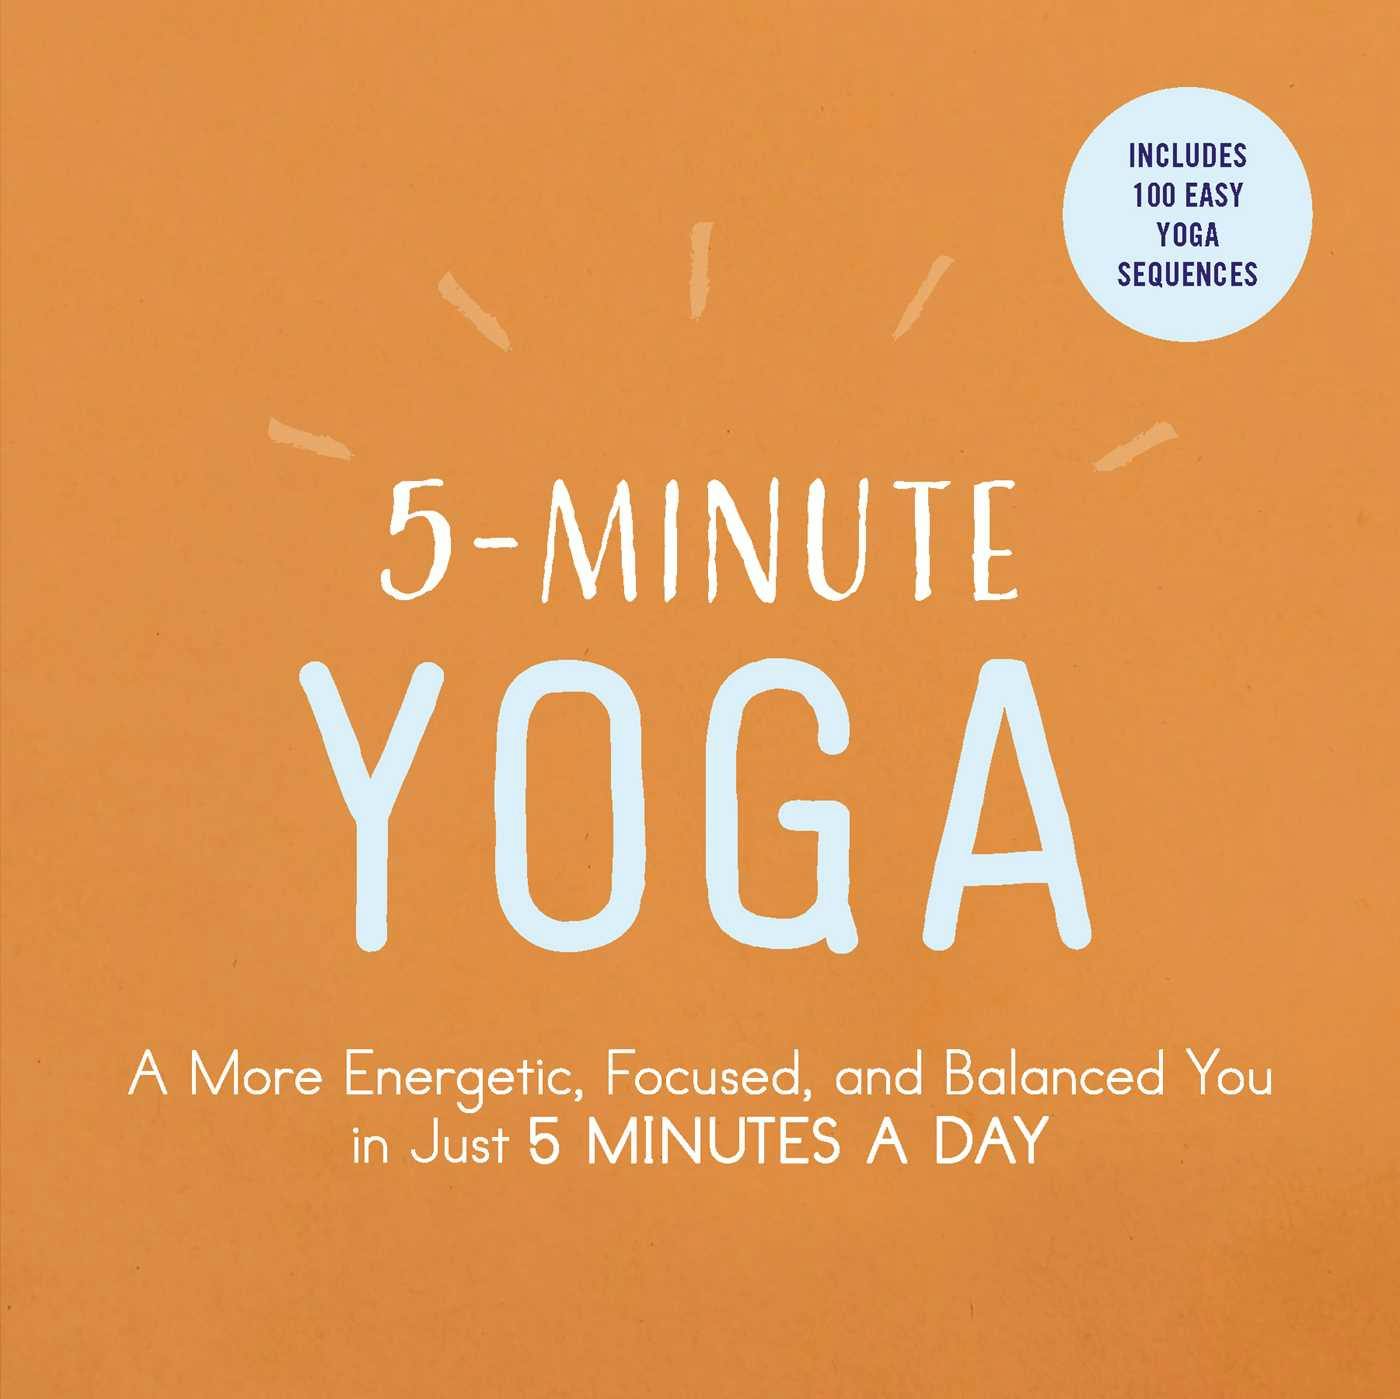 5-Minute Yoga: A More Energetic, Focused, and Balanced You in Just 5 Minutes a Day - undefined